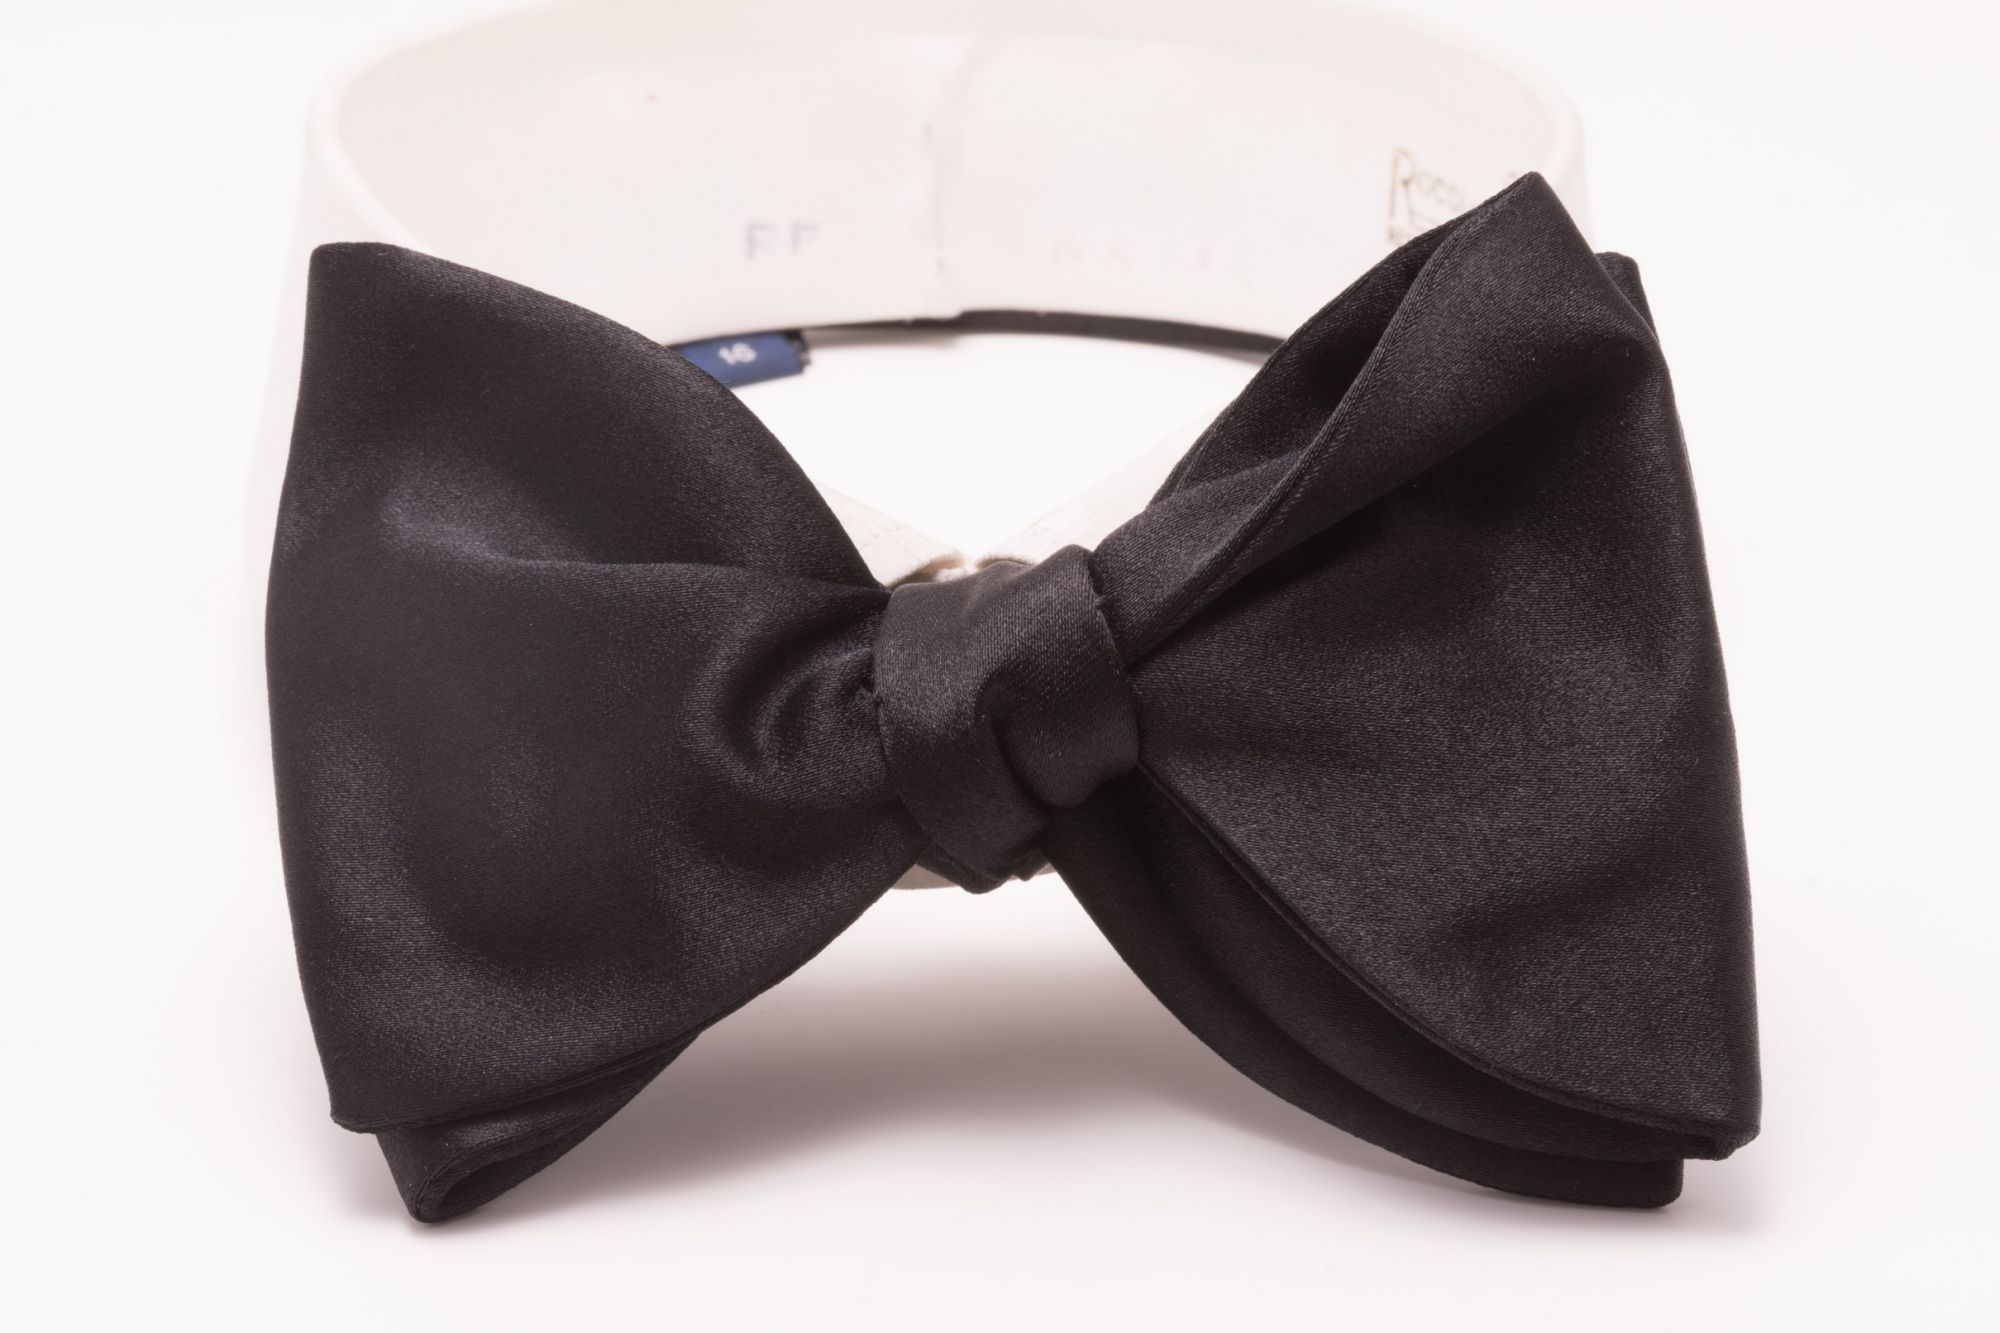 Large Butterfly in Black Silk Satin Bow Tie Sized Self Tie - Fort Belvedere